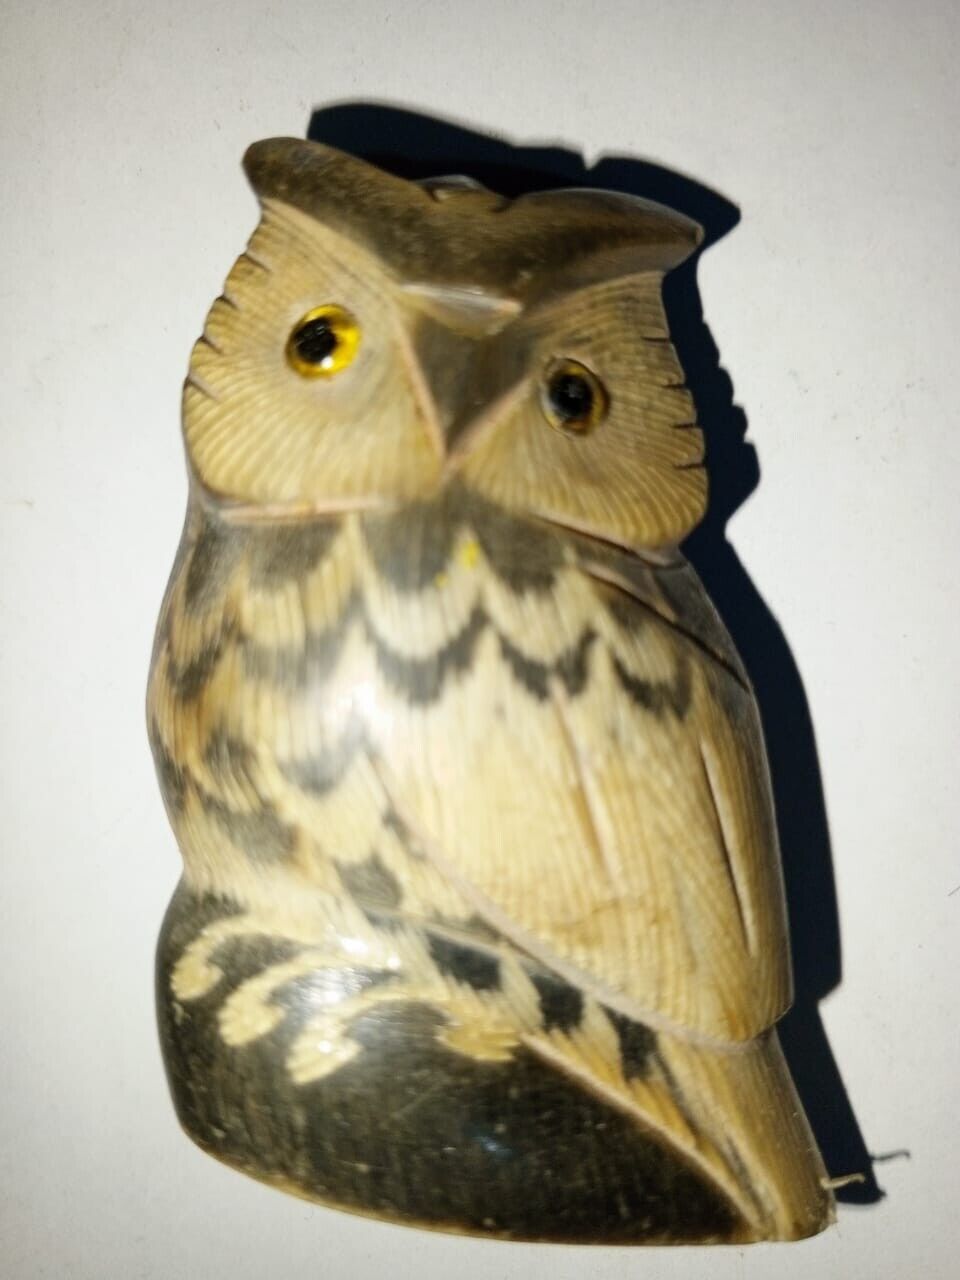 Hand-carved owl, very old antique